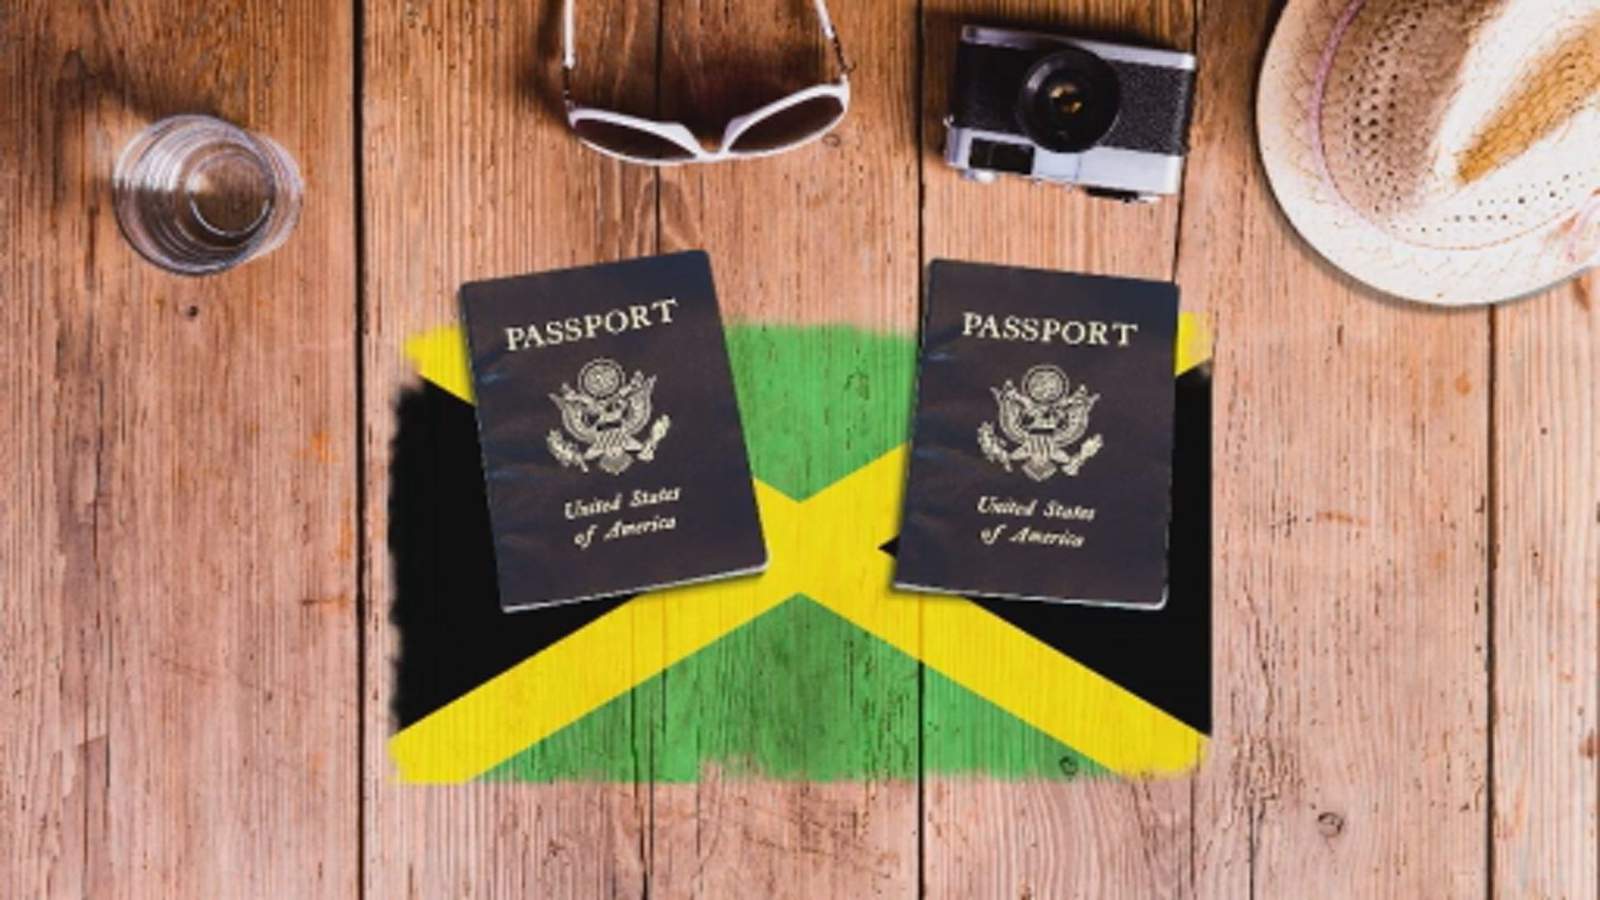 What you need to know about the passport process during the coronavirus pandemic